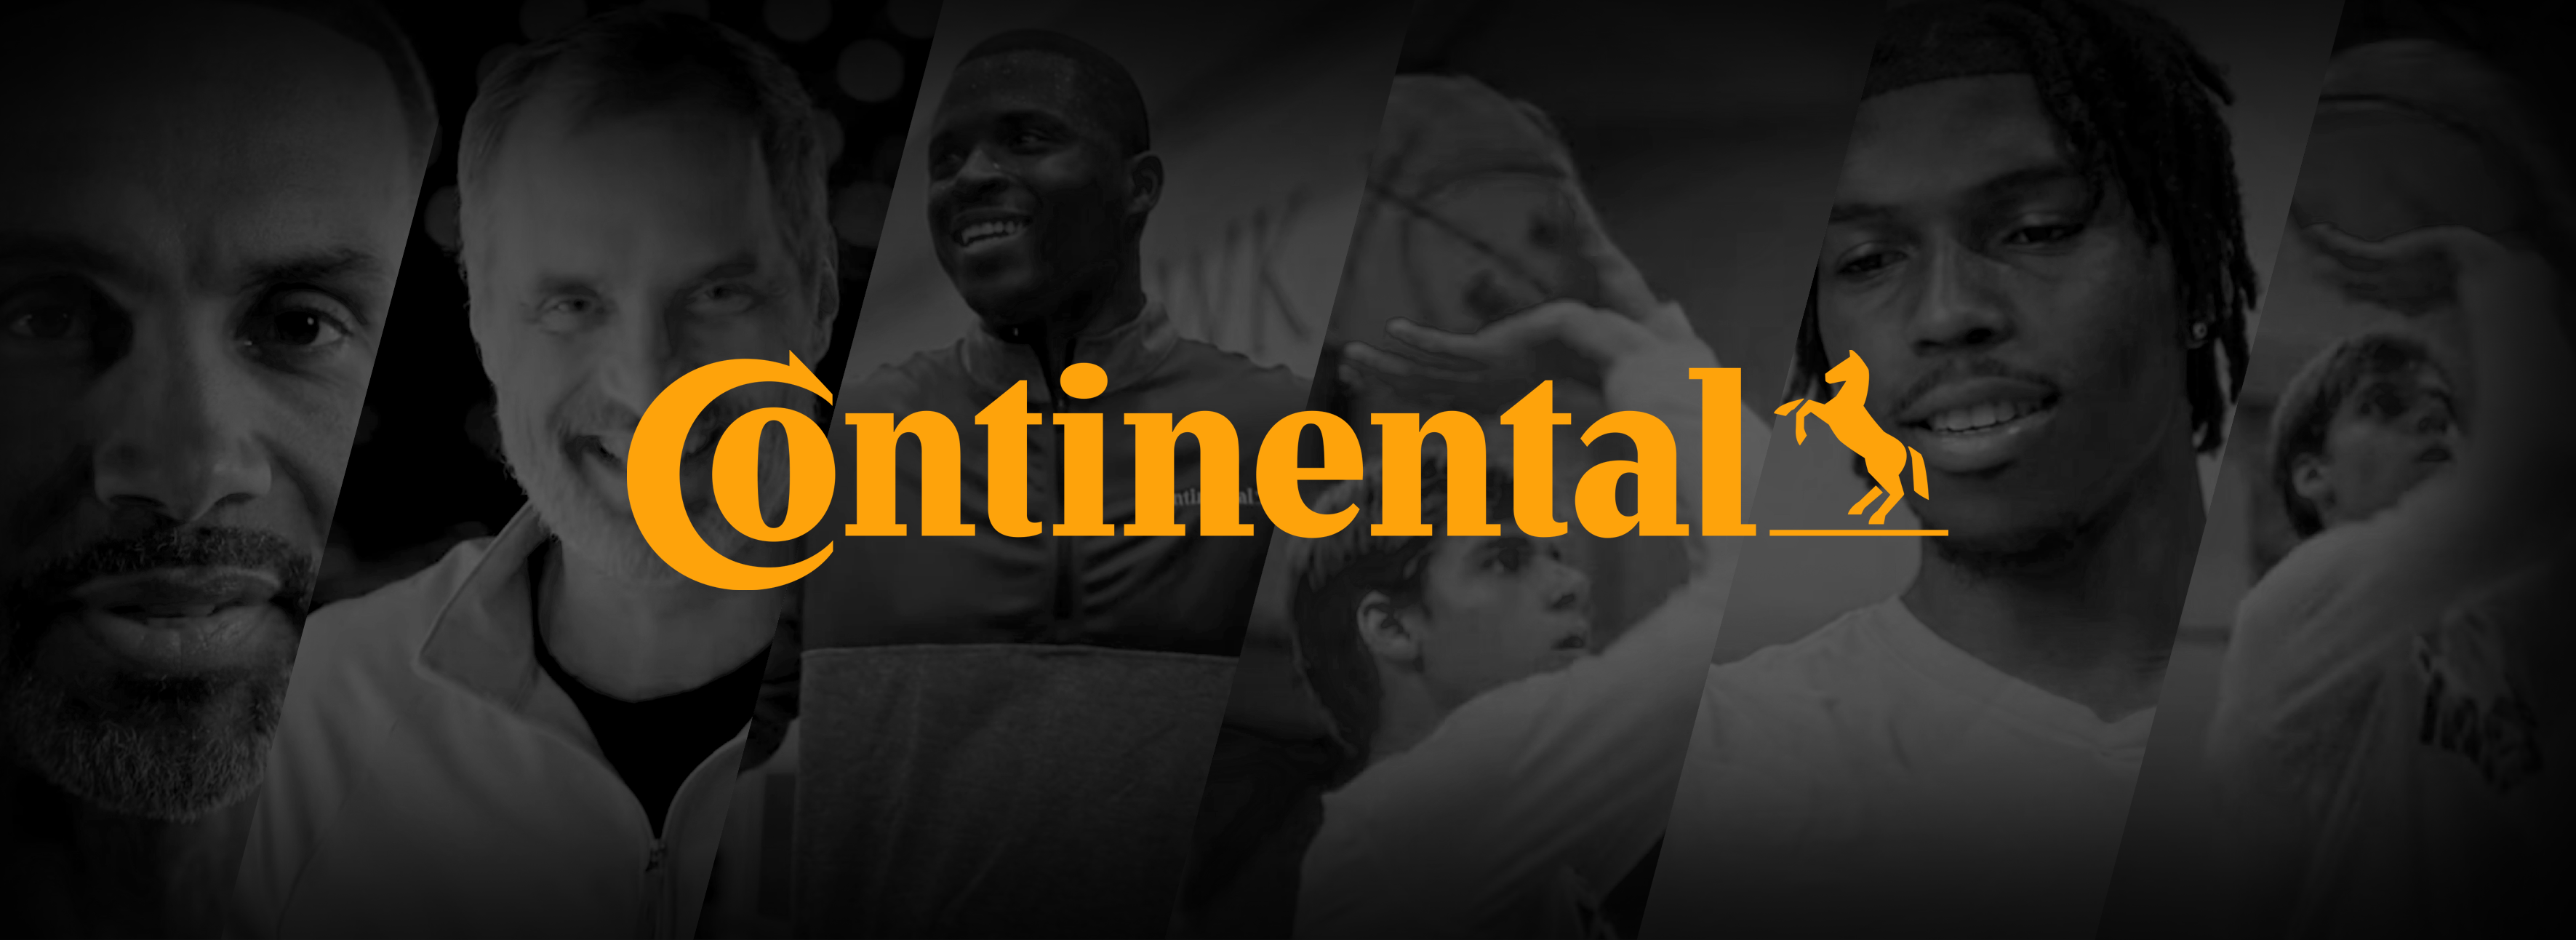 Continental Tire Runs It Back with New NIL Campaign & College Basketball Broadcast Spot